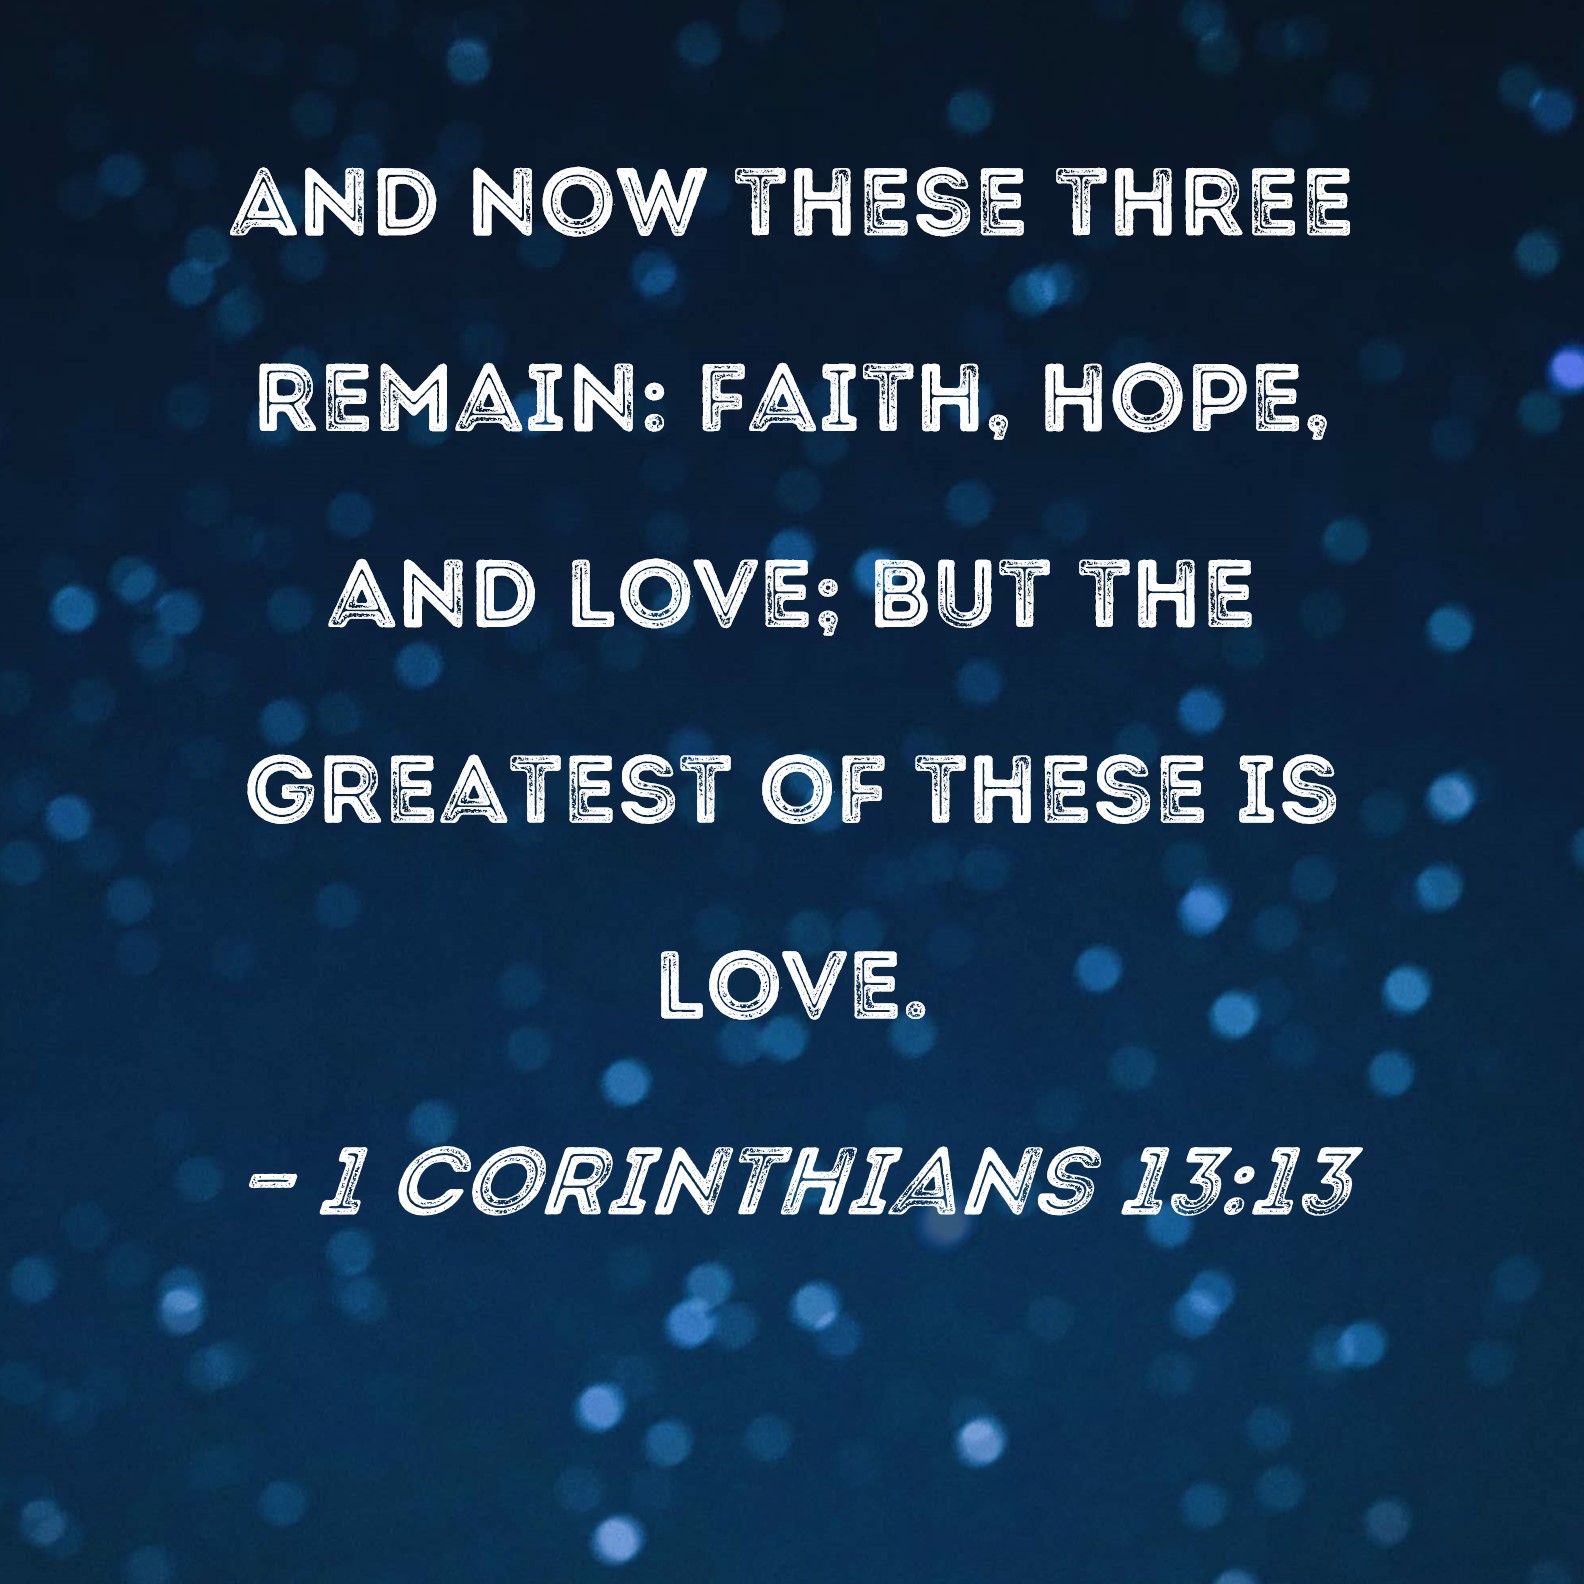 1 Corinthians 13:13 And now these three remain: faith, hope, and